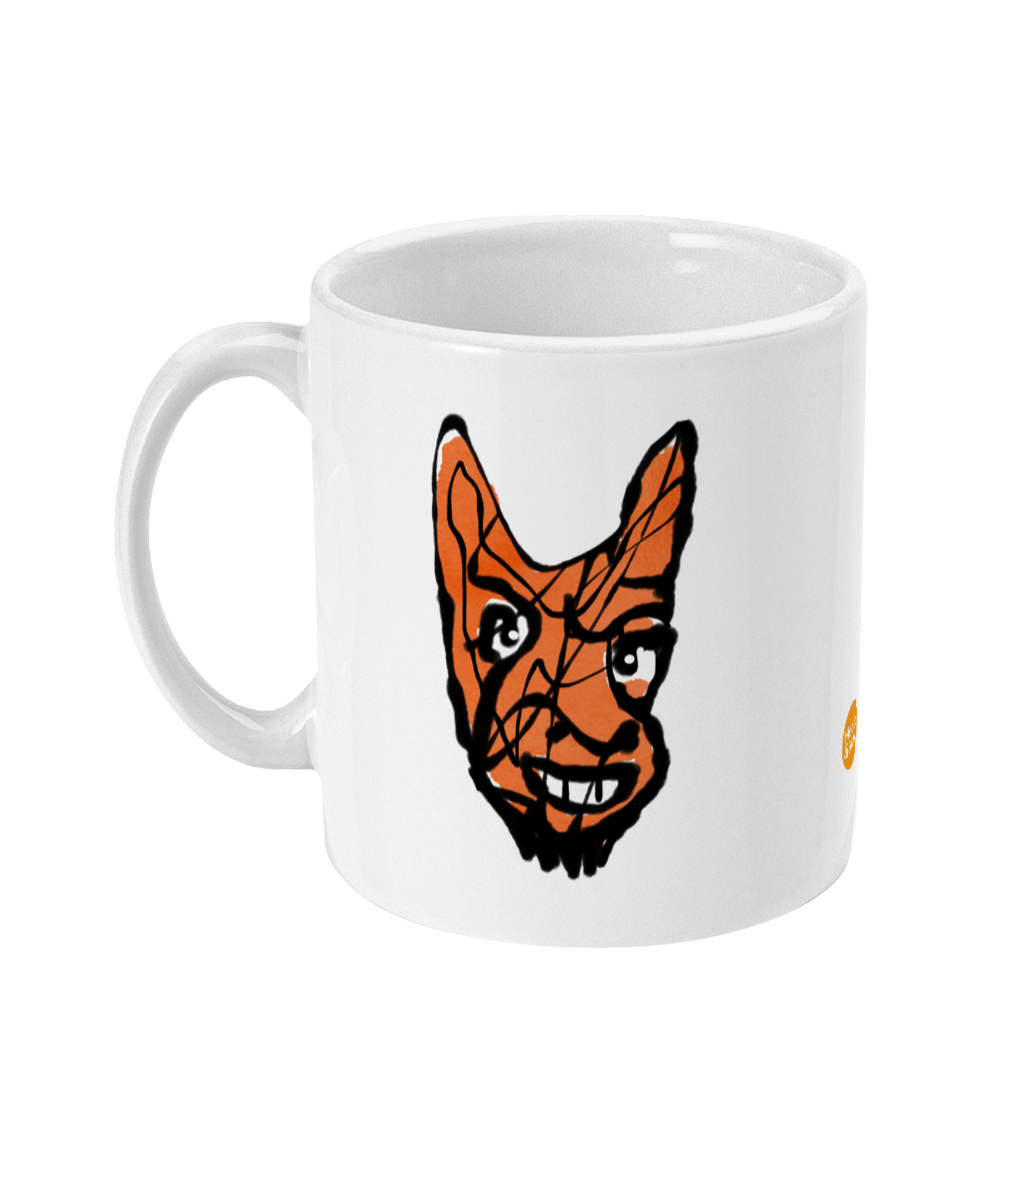 Cheeky Little Devil design coffee mug by Hector and Bone Left View